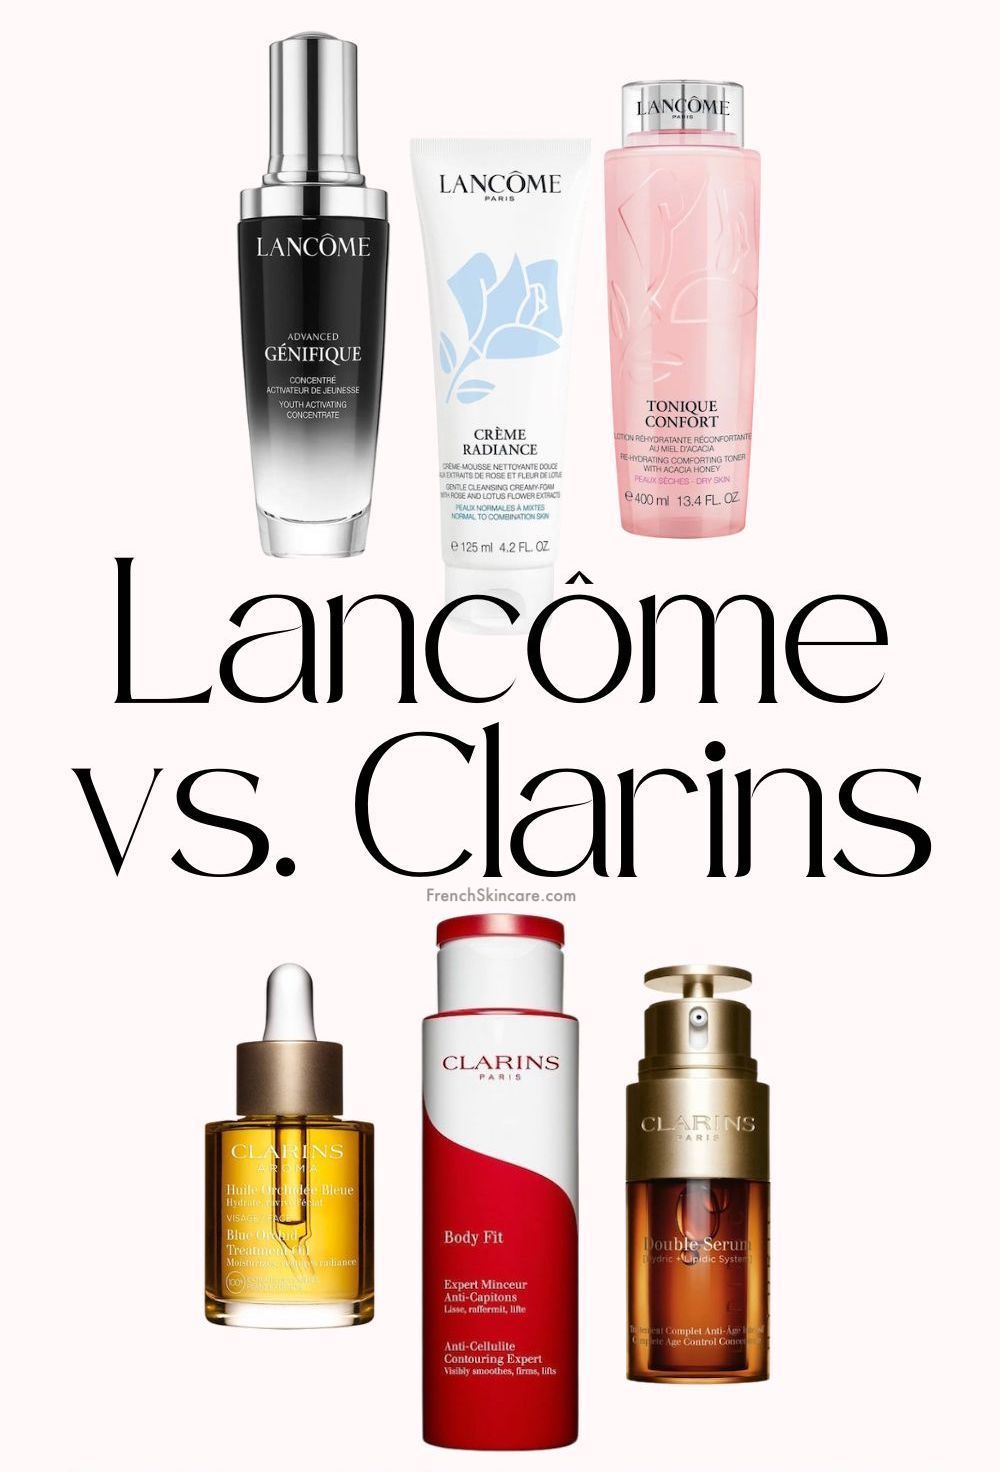 Lancôme vs Clarins: Which is Better for Skincare?